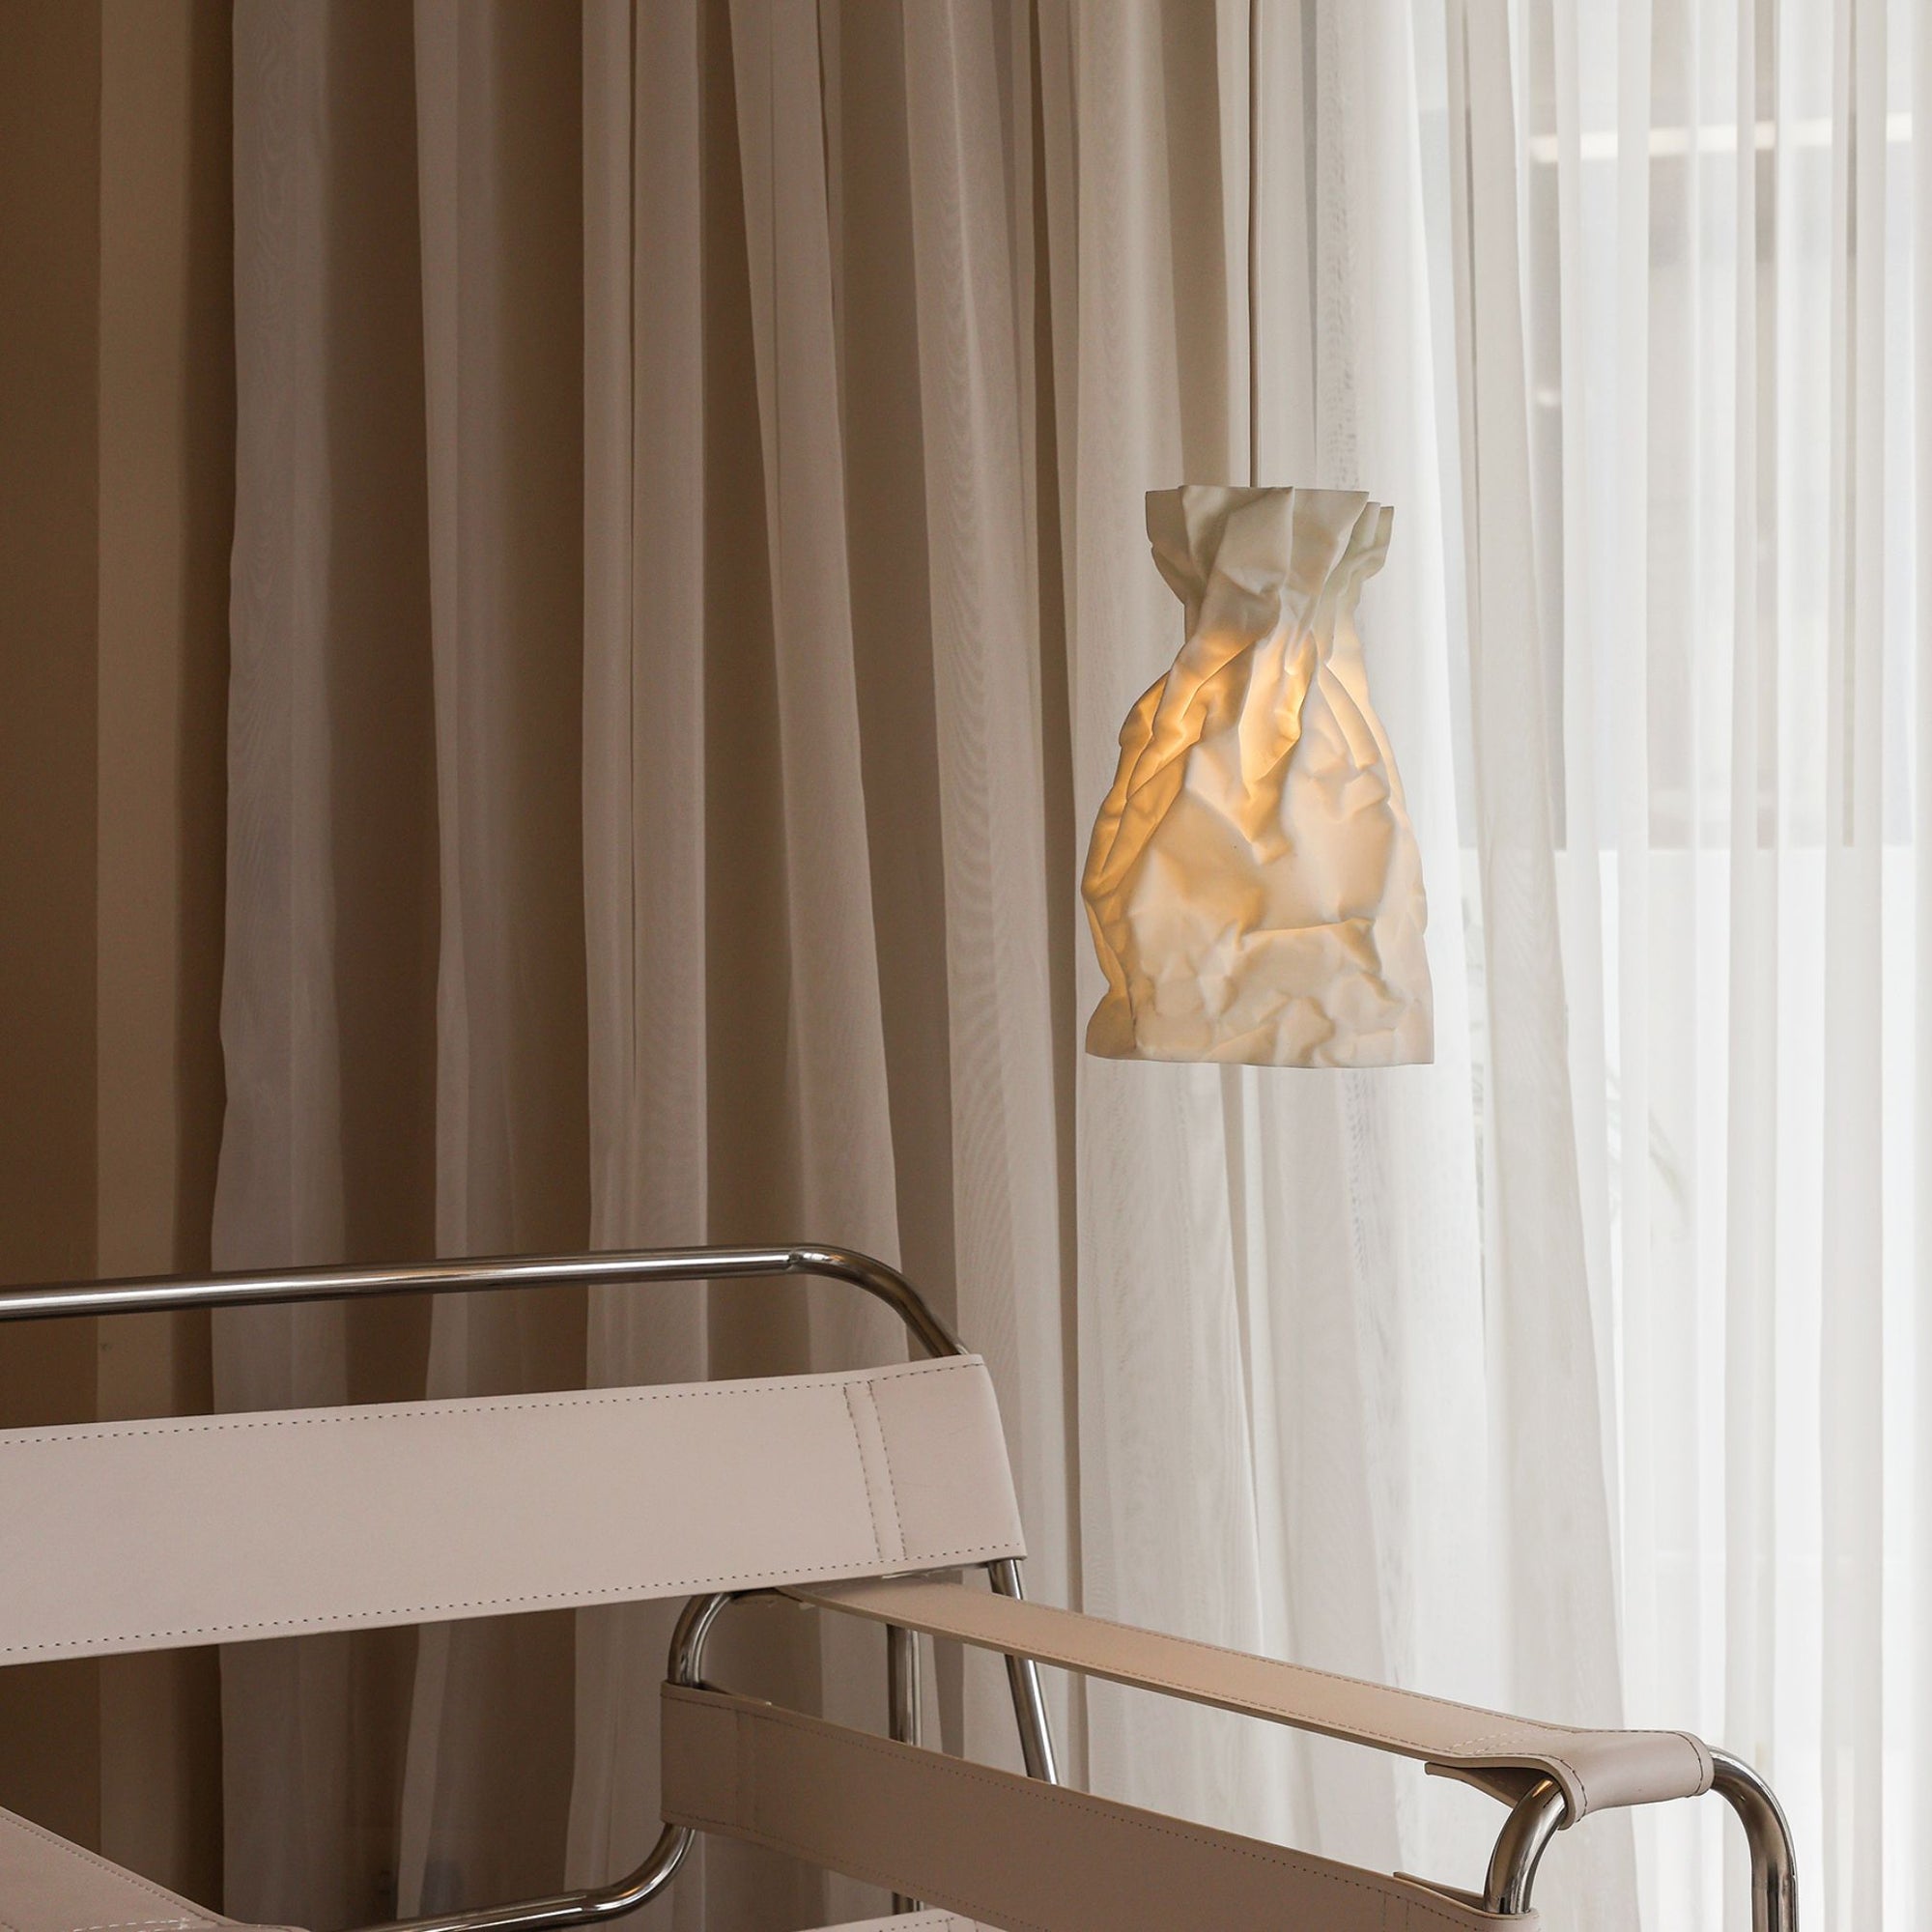 Paper pendant light: a crumpled paper sculpture has never looked so good!